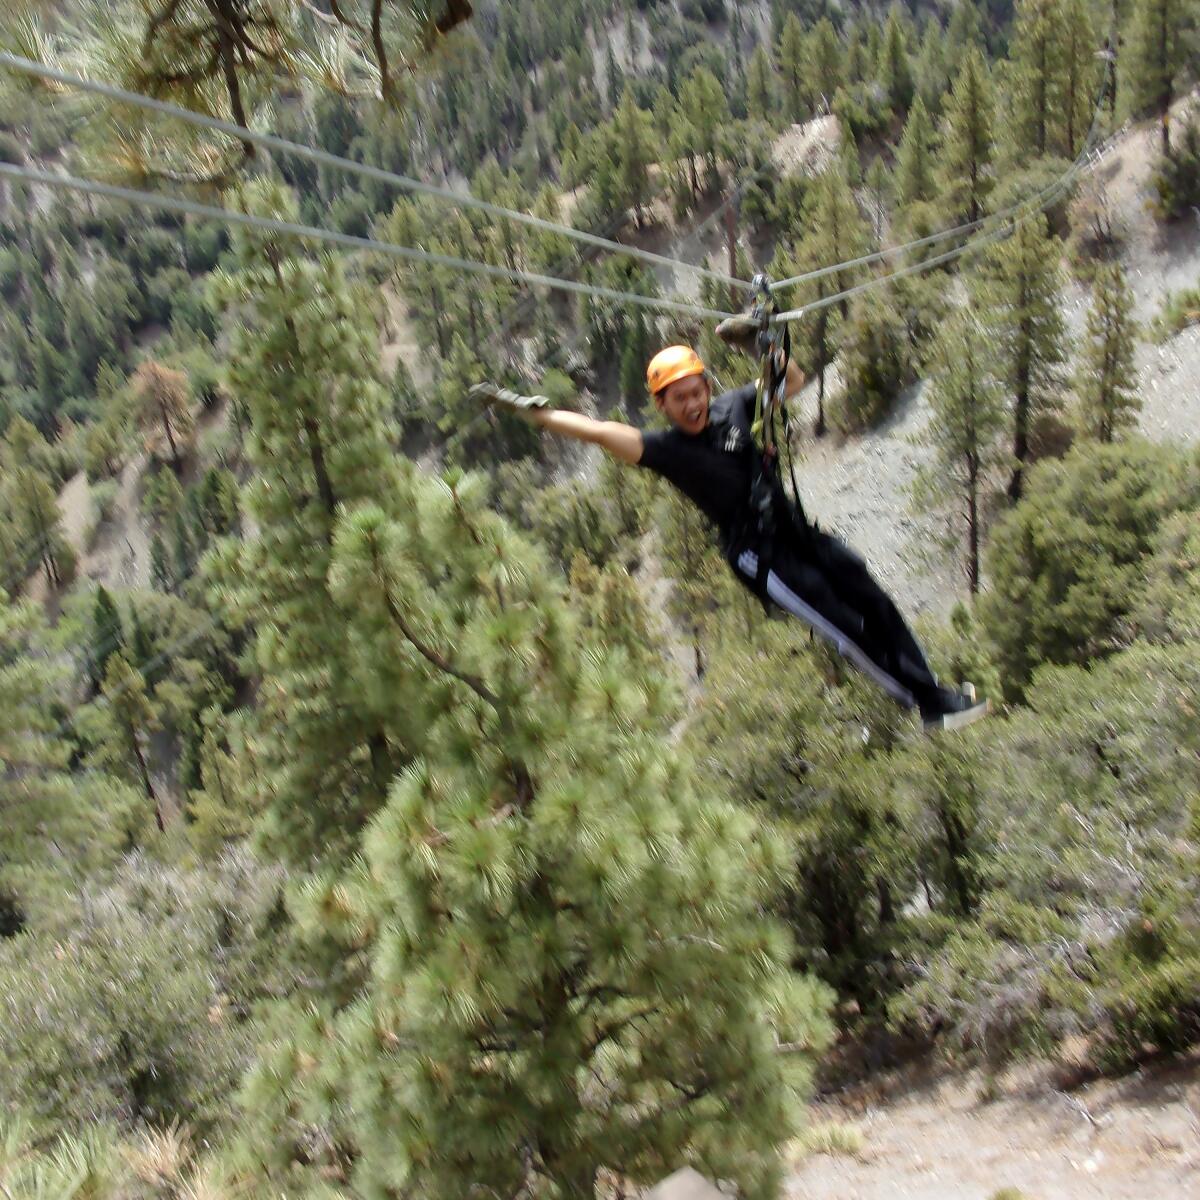 A young man riding a zipline over the forest floor.